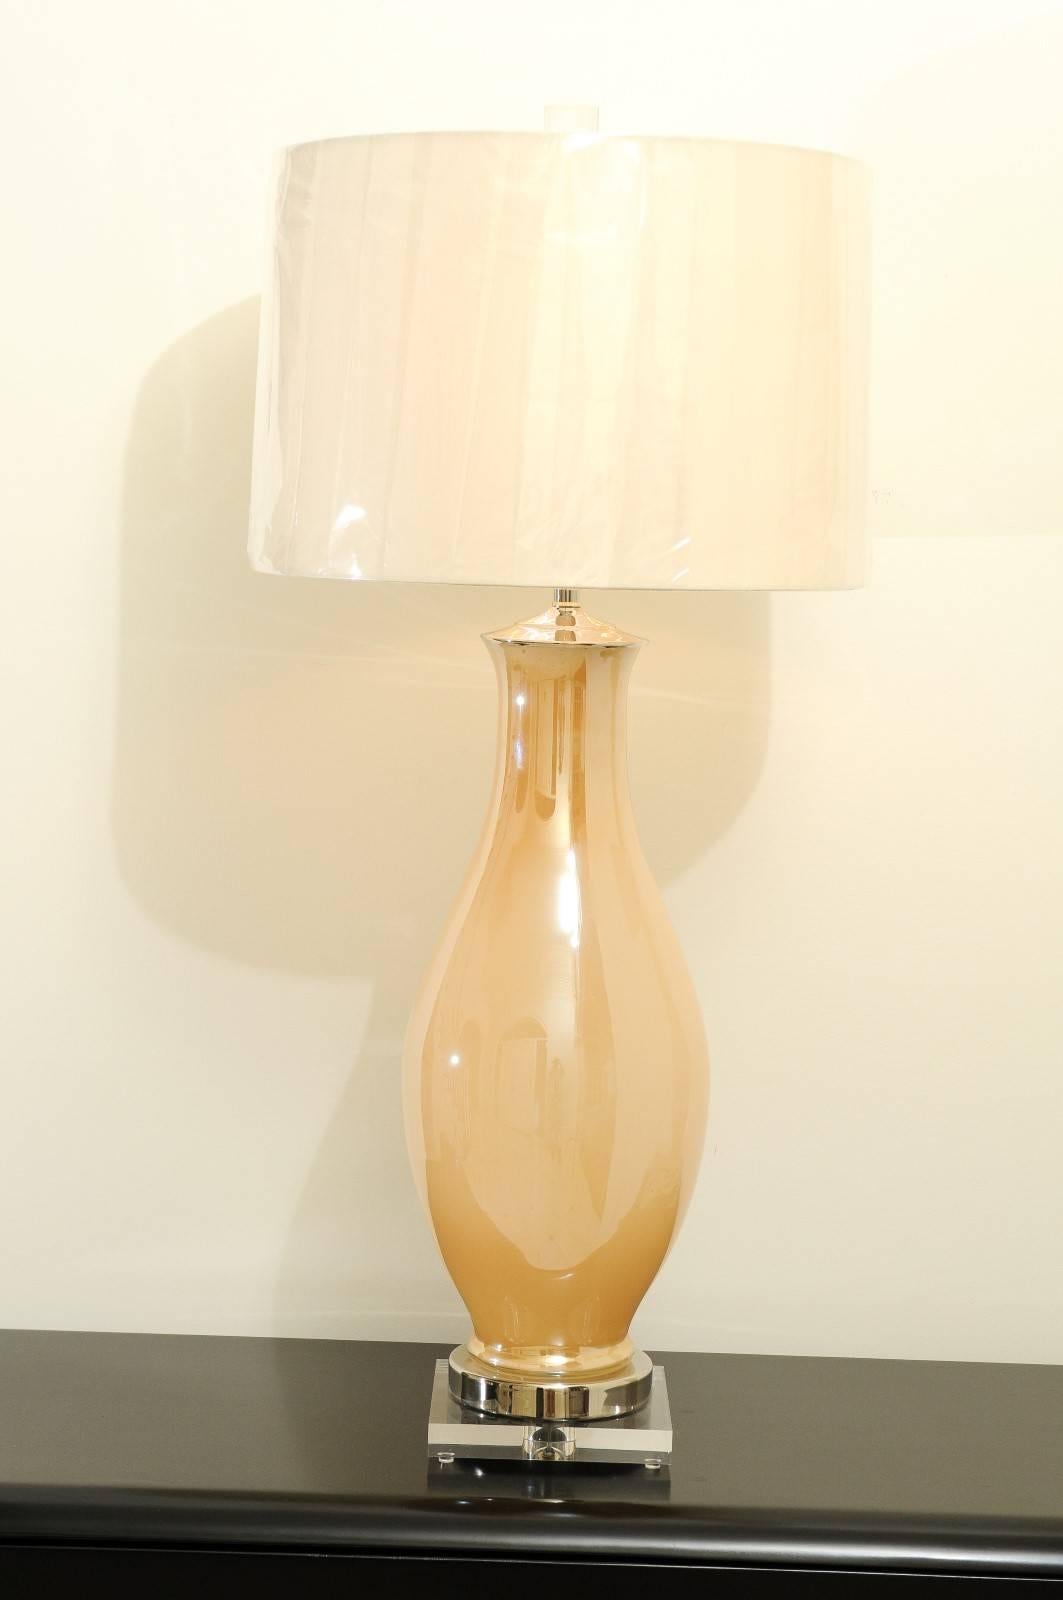 A stellar pair of blown Murano lamps, circa 1960. Exceptional form and scale. Reverse painting provides a beautiful pearl-like, iridescent quality. Sublime craftsmanship. These timeless pieces will blend seamlessly into any interior. Fabulous